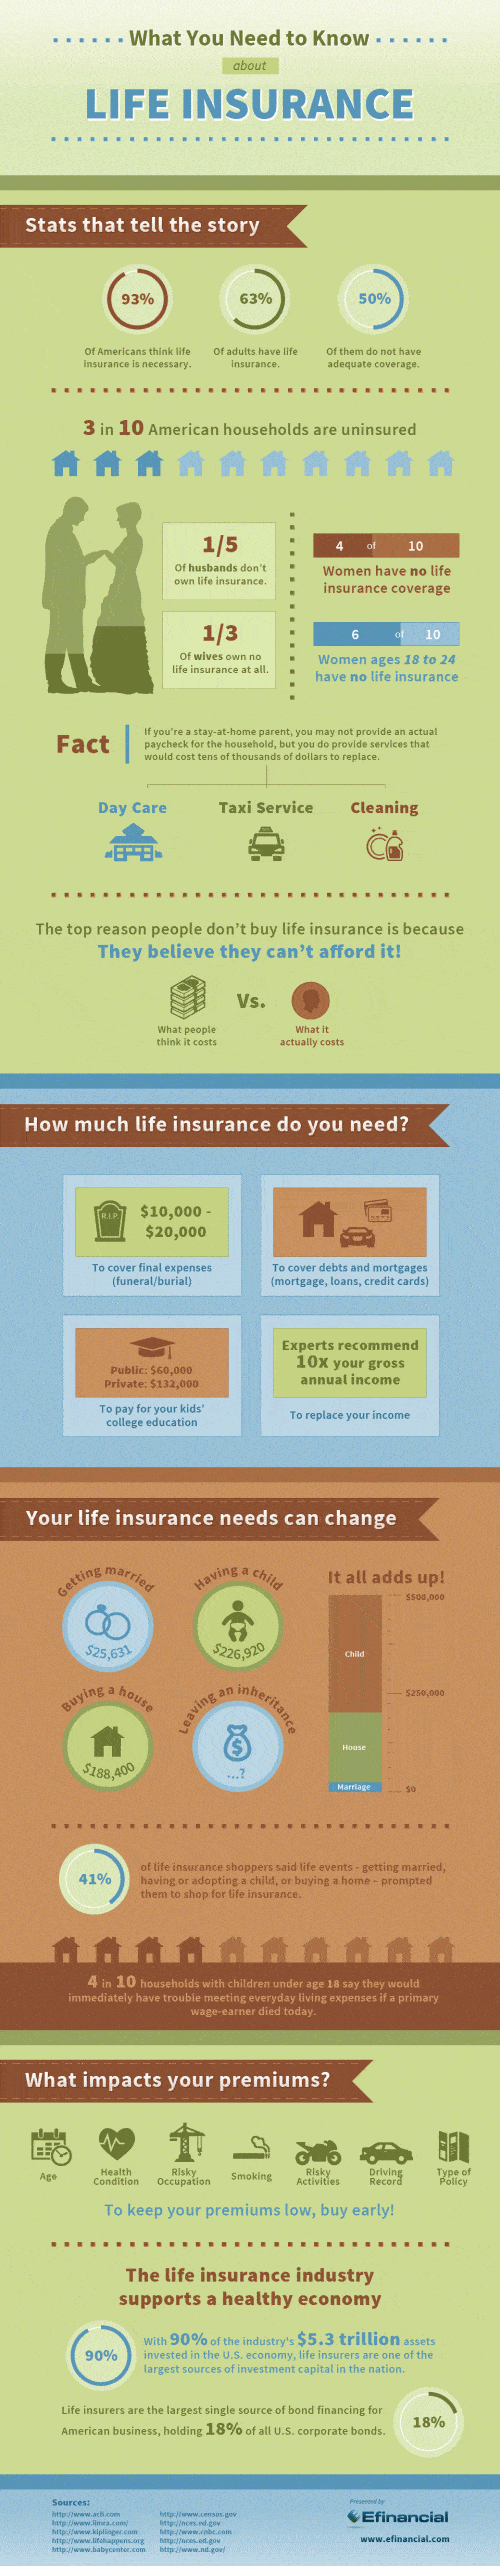 Facts on Life Insurance Infographic